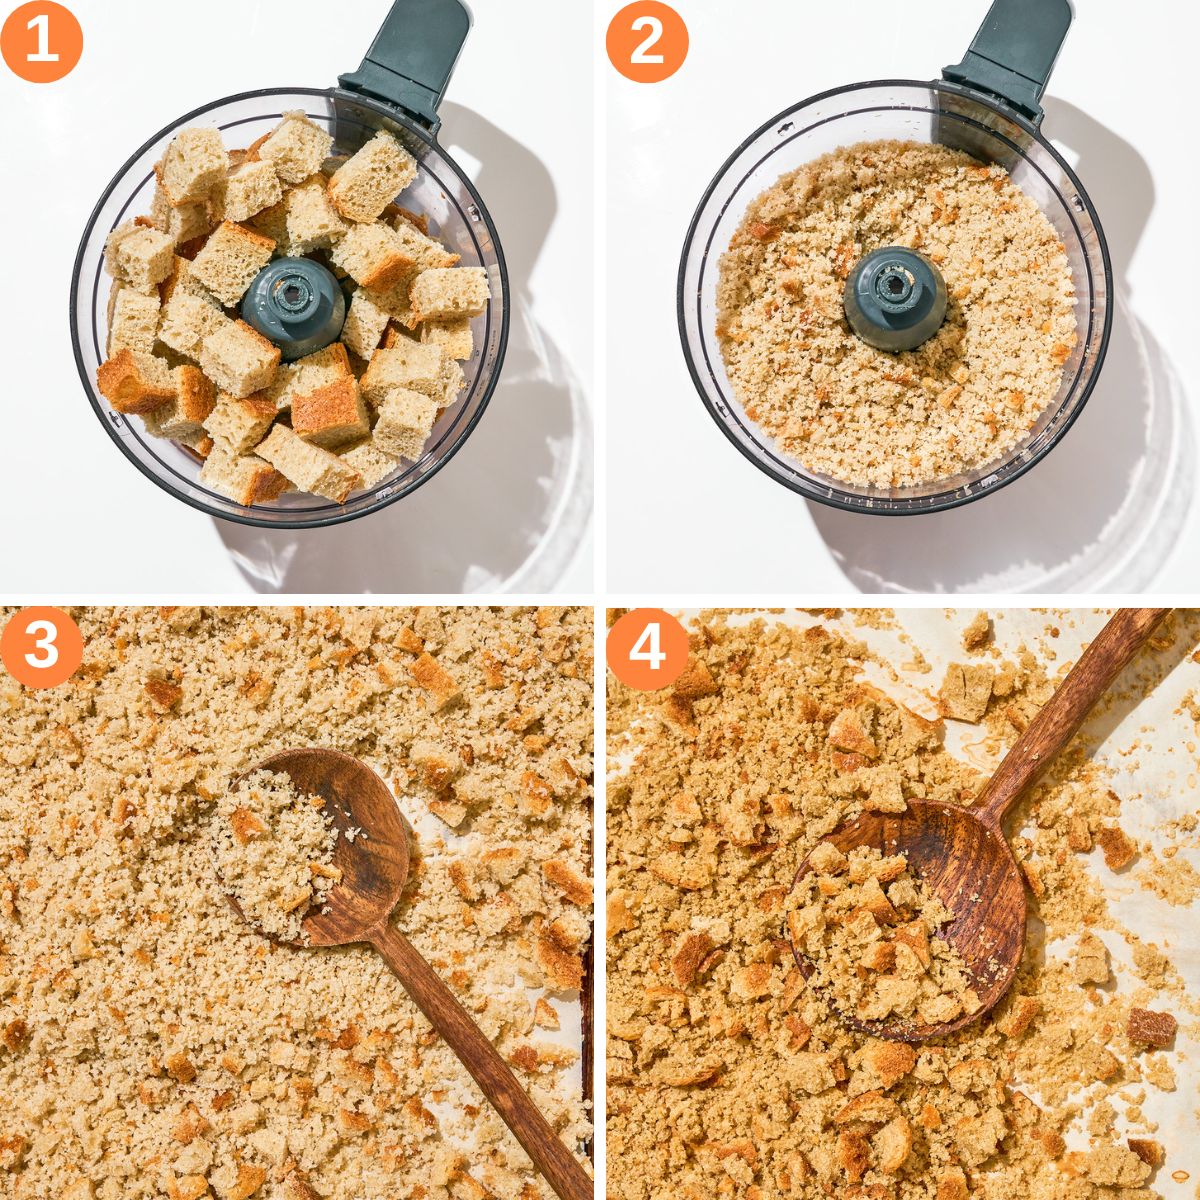 Steps 1 to 4, making bread crumbs in a food processor.